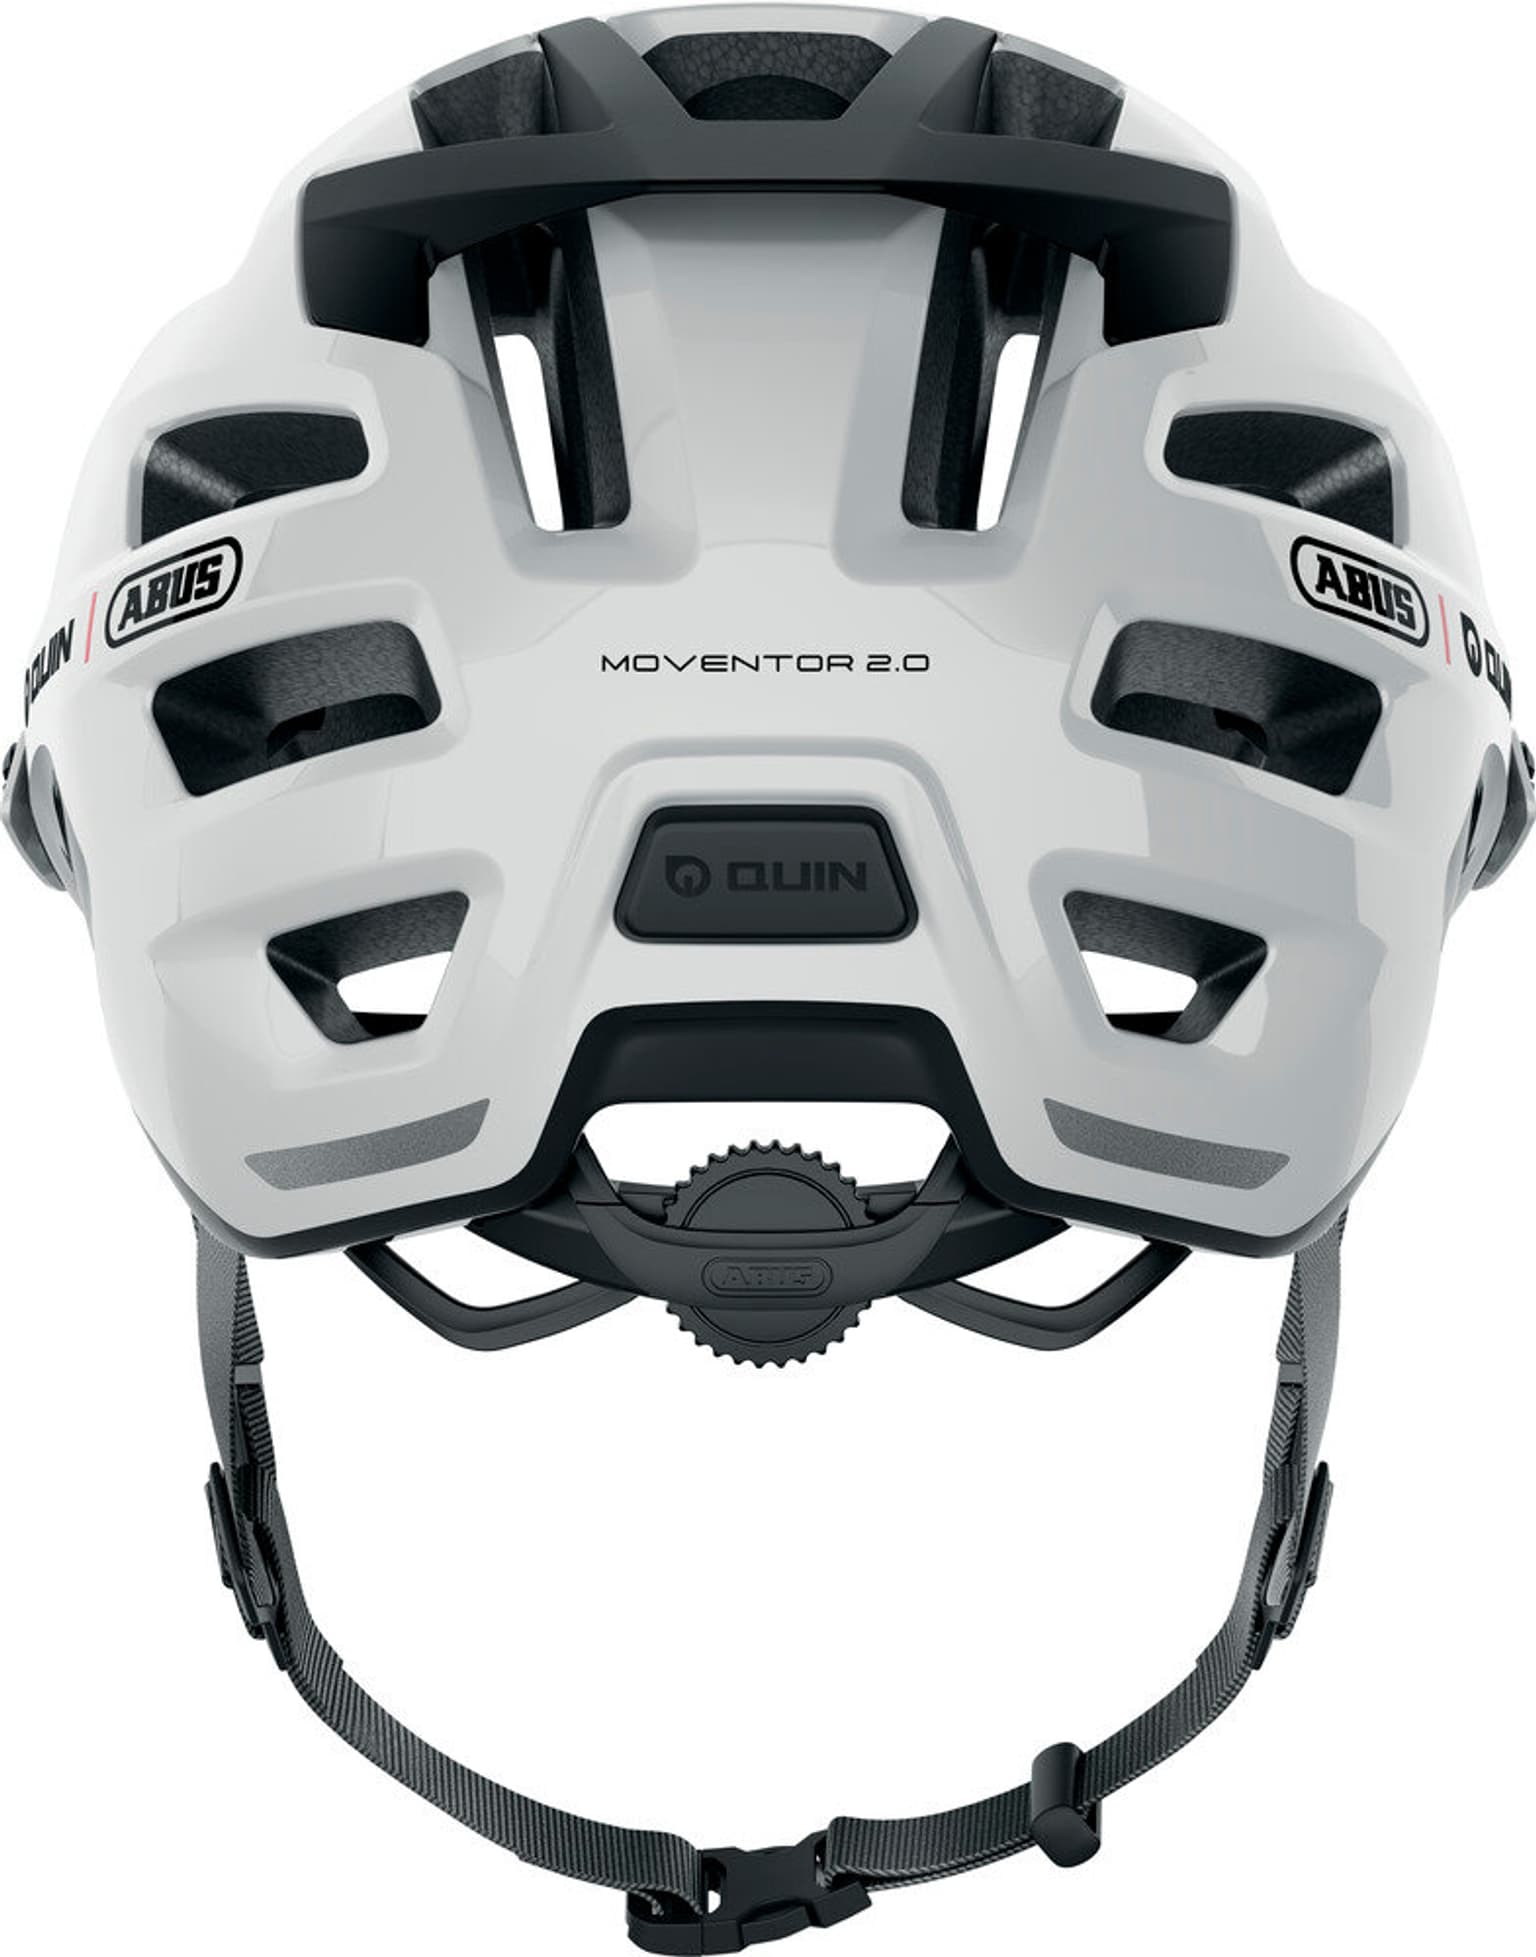 Abus Abus Moventor 2.0 QUIN Velohelm weiss 3